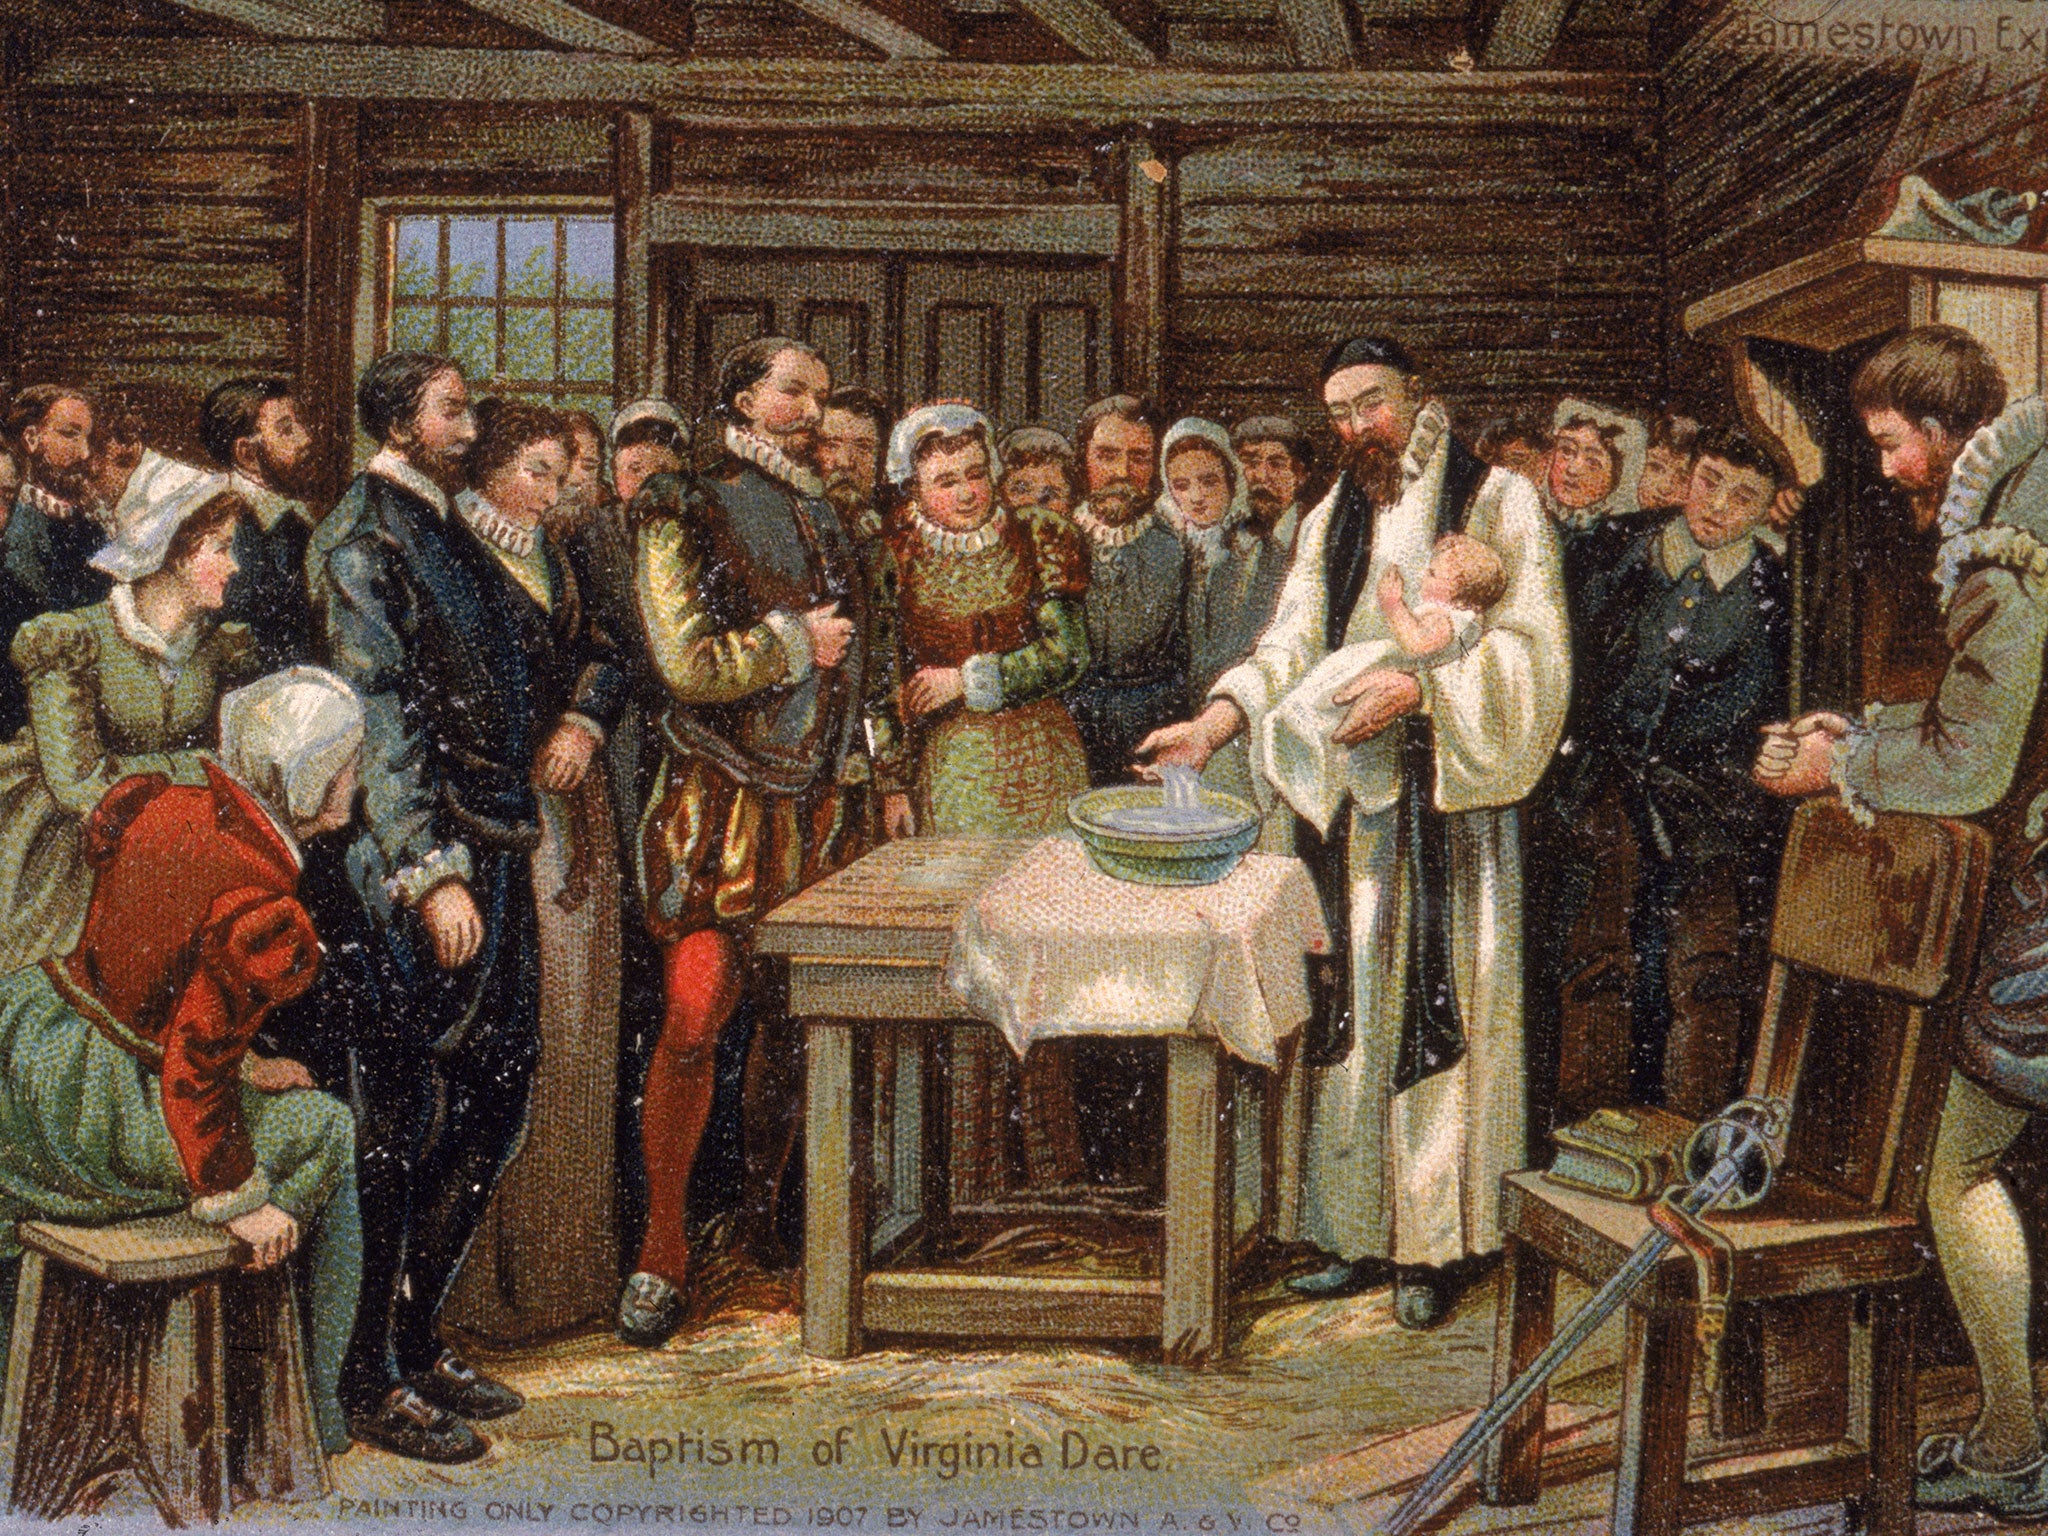 Virginia Dare, the first child to be born to English colonists, disappeared with her parents